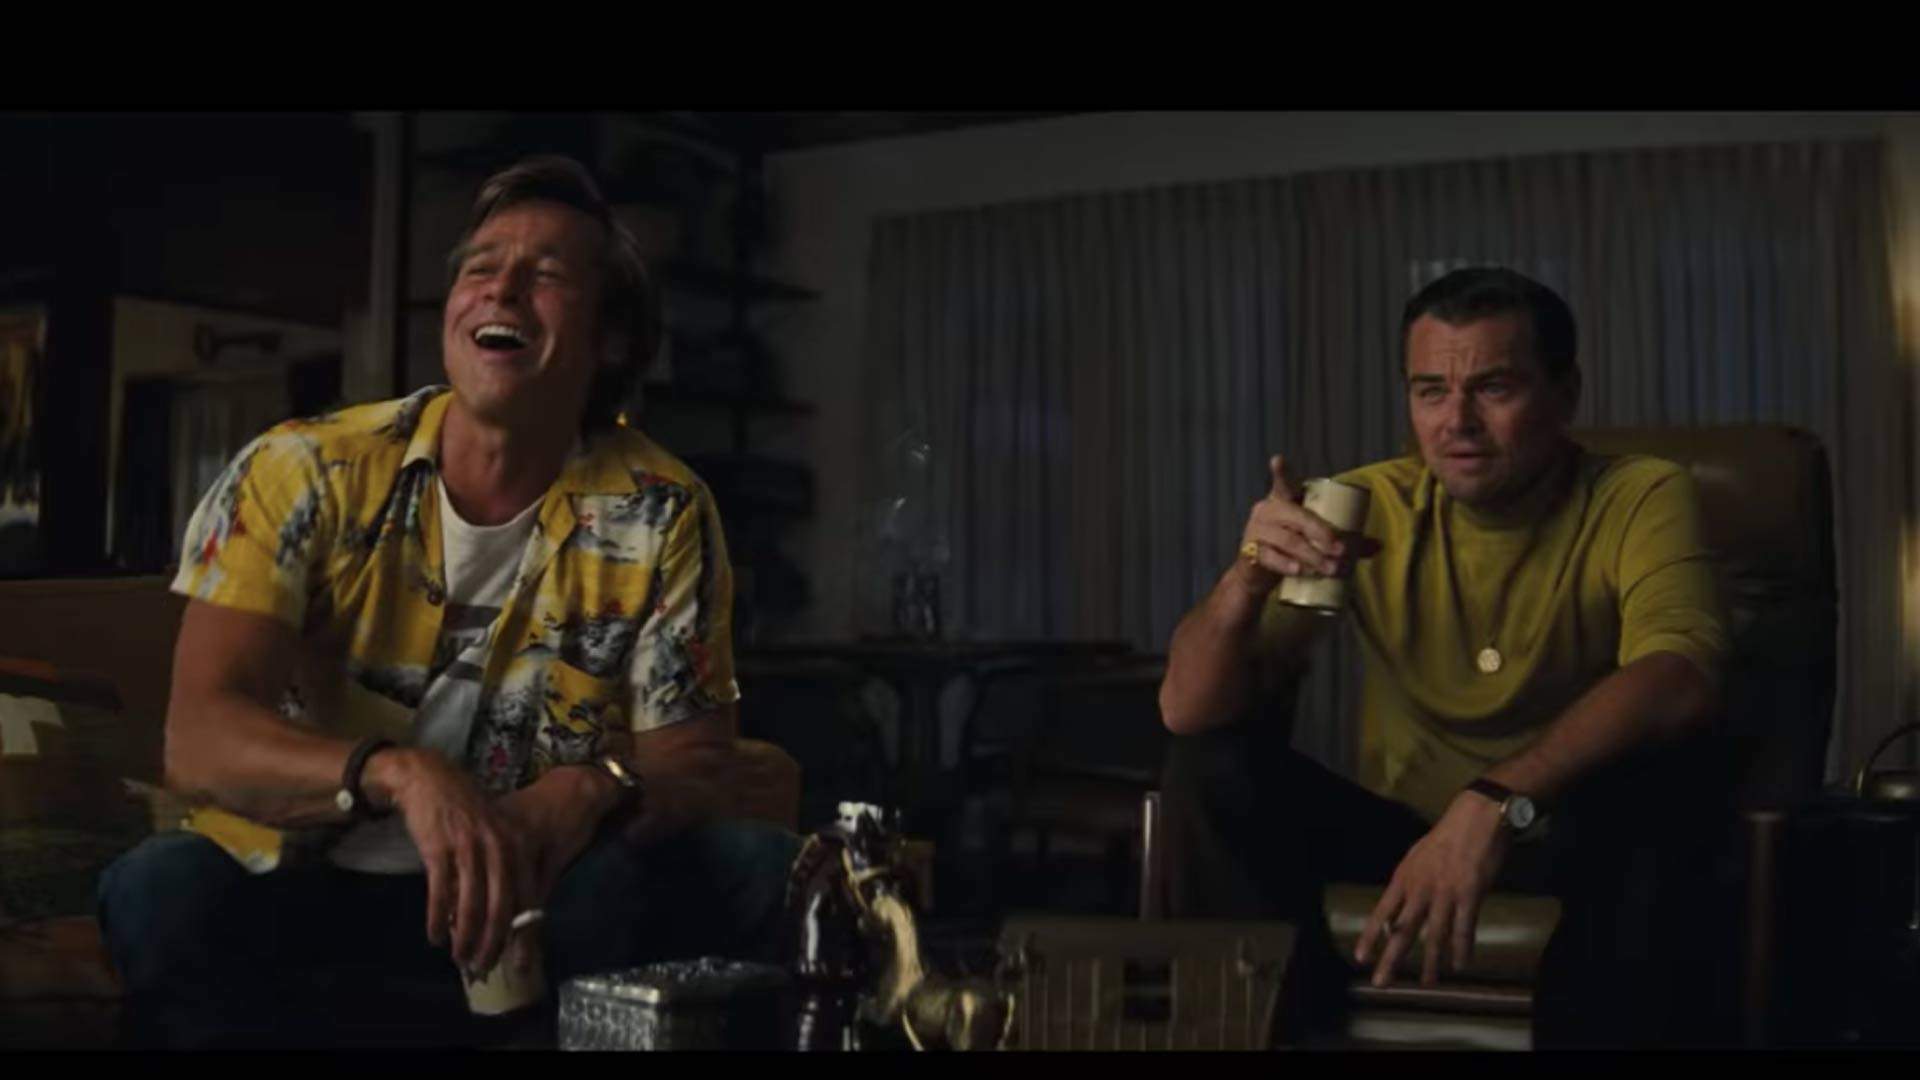 The Full Trailer Has Dropped for Quentin Tarantino's Star-Studded 'Once Upon a Time in Hollywood'